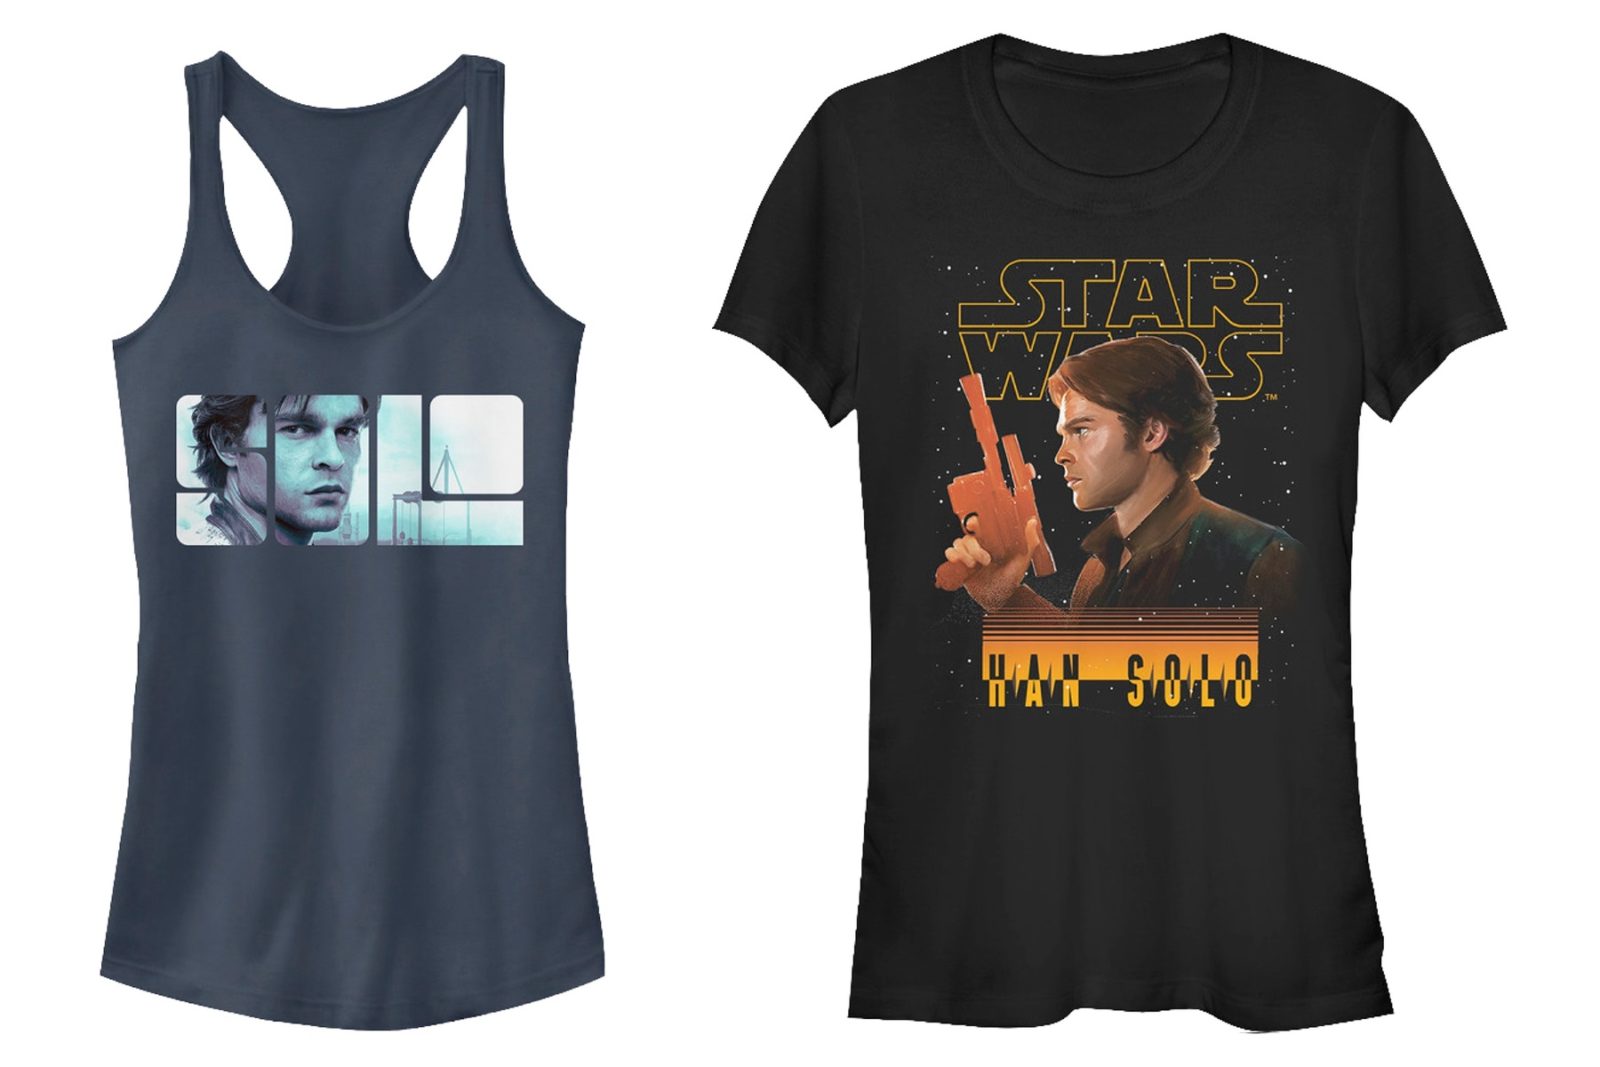 Women’s Star Wars Solo Tops at 80’s Tees